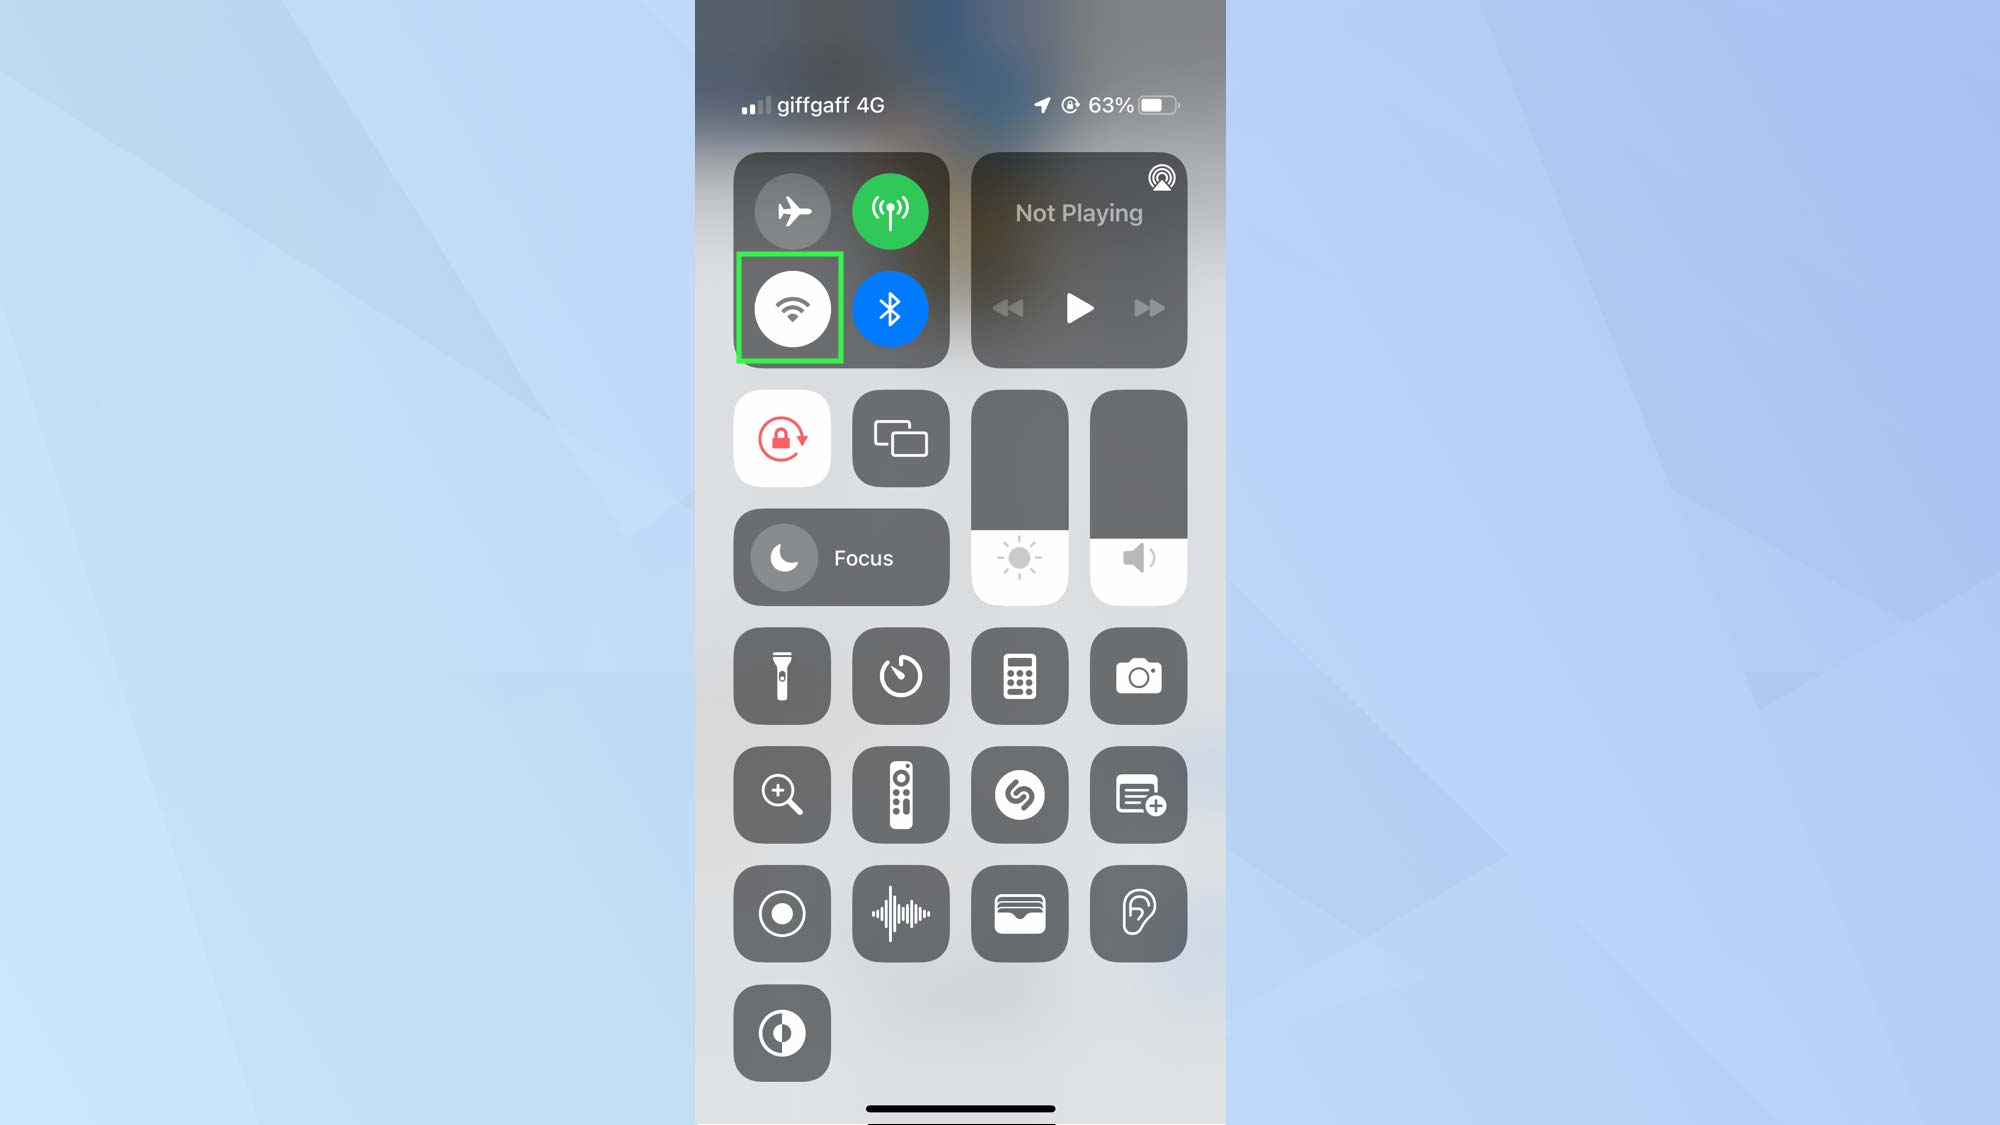 A screenshot from an iPhone showing the Control Center